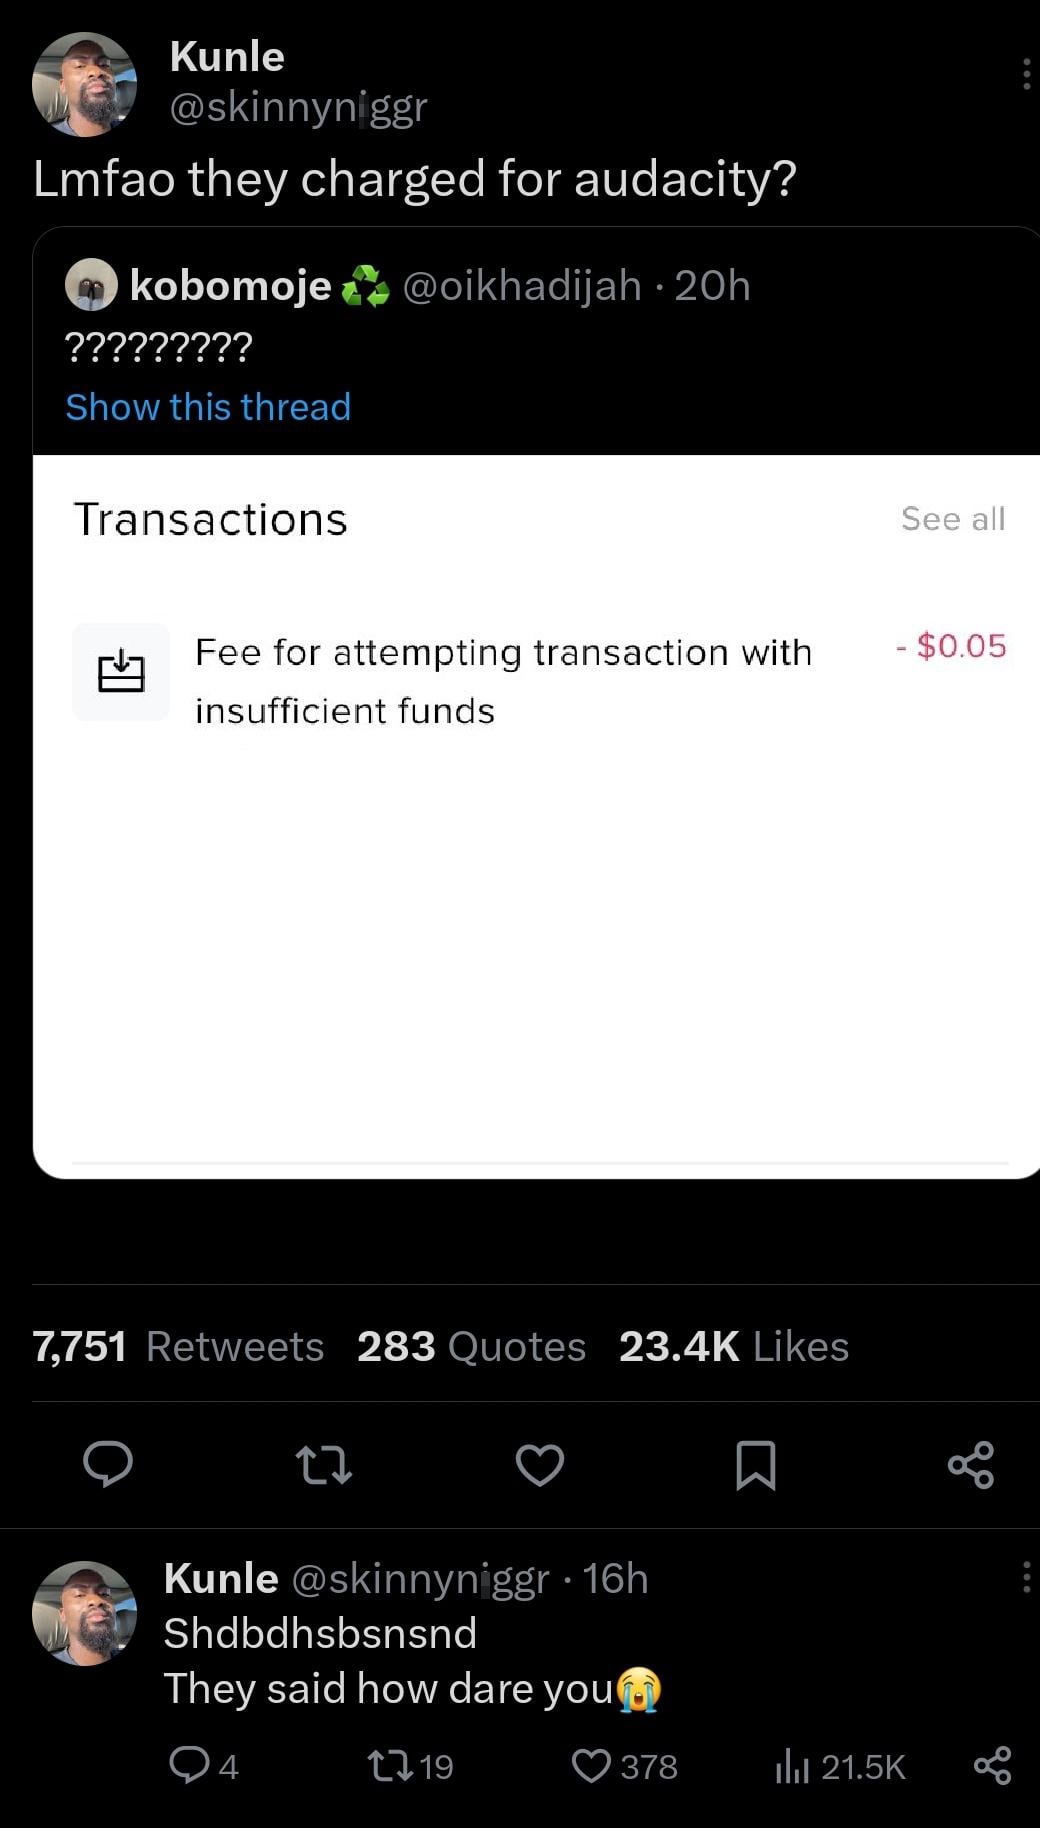 funny tweets - Funny meme - Kunle Lmfao they charged for audacity? kobomoje 20h ????????? Show this thread Transactions Fee for attempting transaction with insufficient funds 7,751 283 Quotes Kunle 16h Shdbdhsbsnsnd They said how dare you 94 119 378 See a